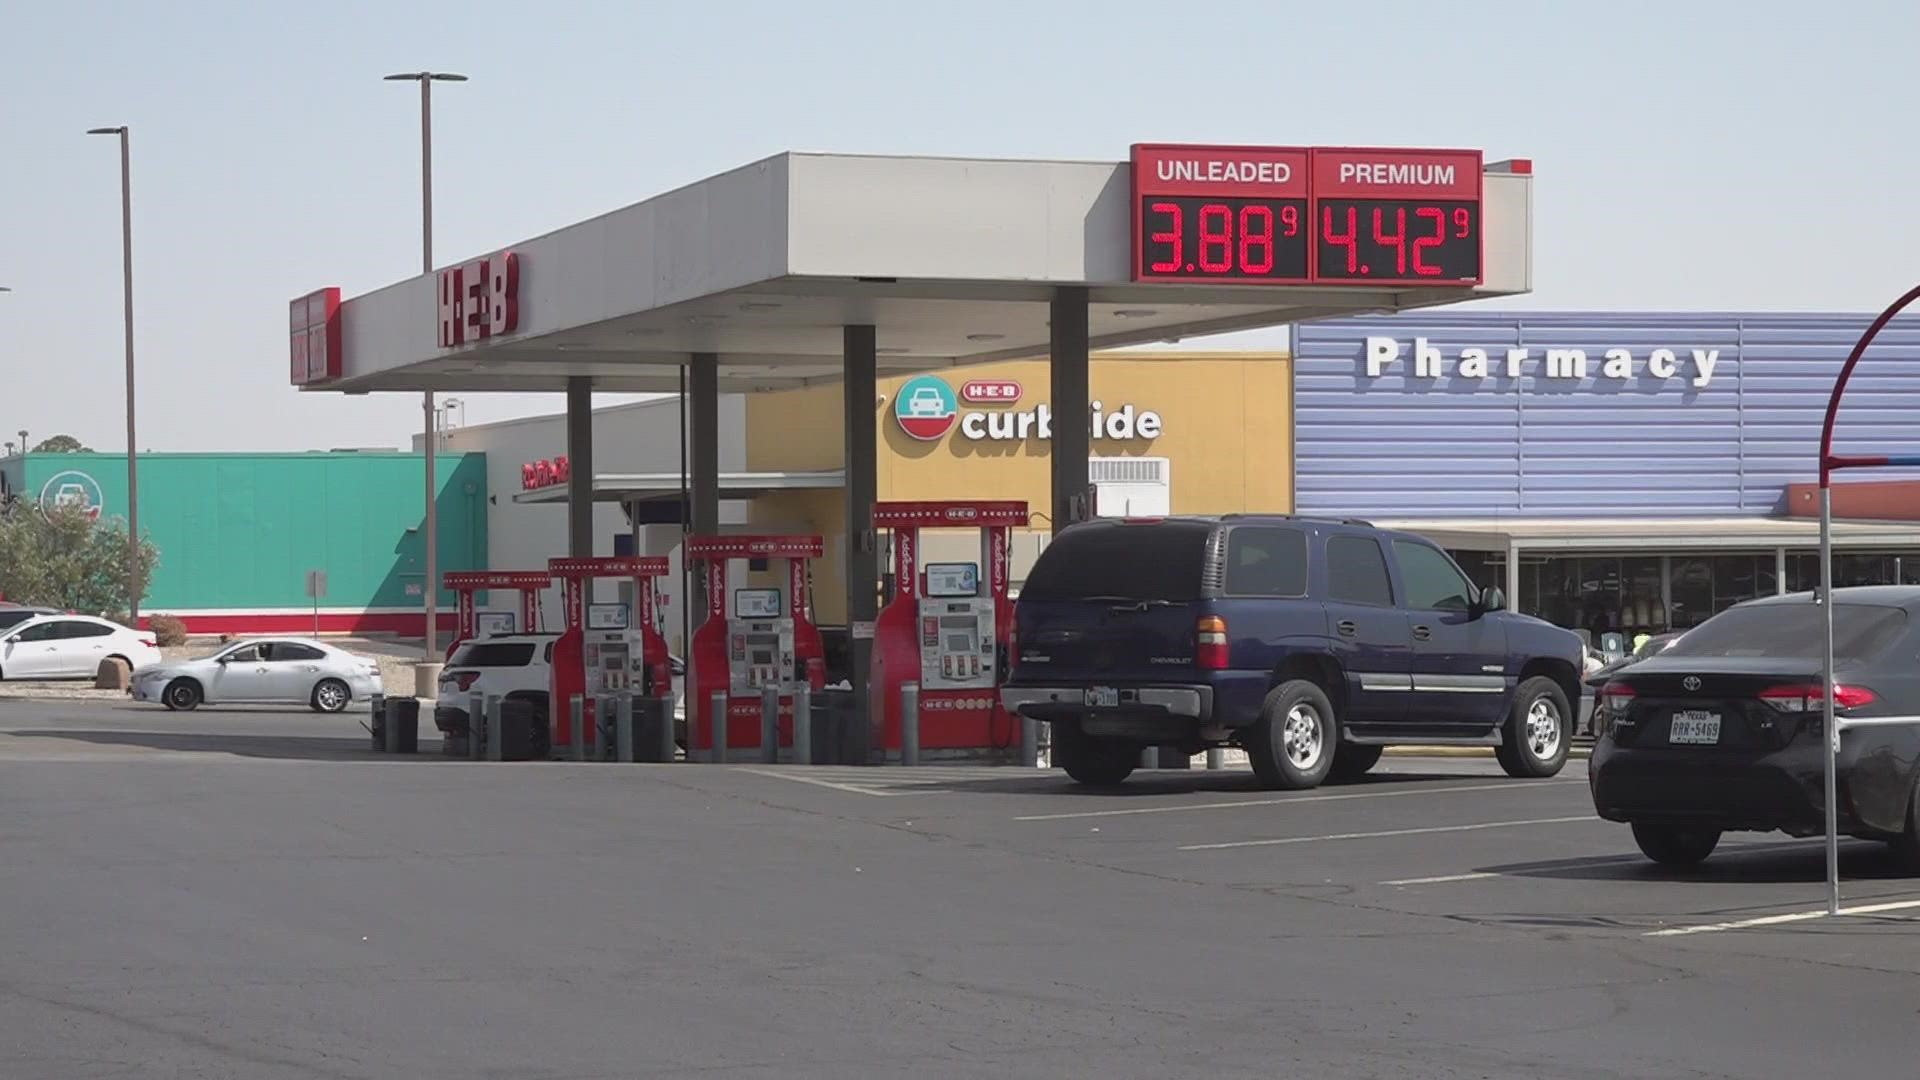 According to Triple A, gas prices are 47 cents down in Midland and down nearly a dollar in Odessa. This is due to crude oil also being down.